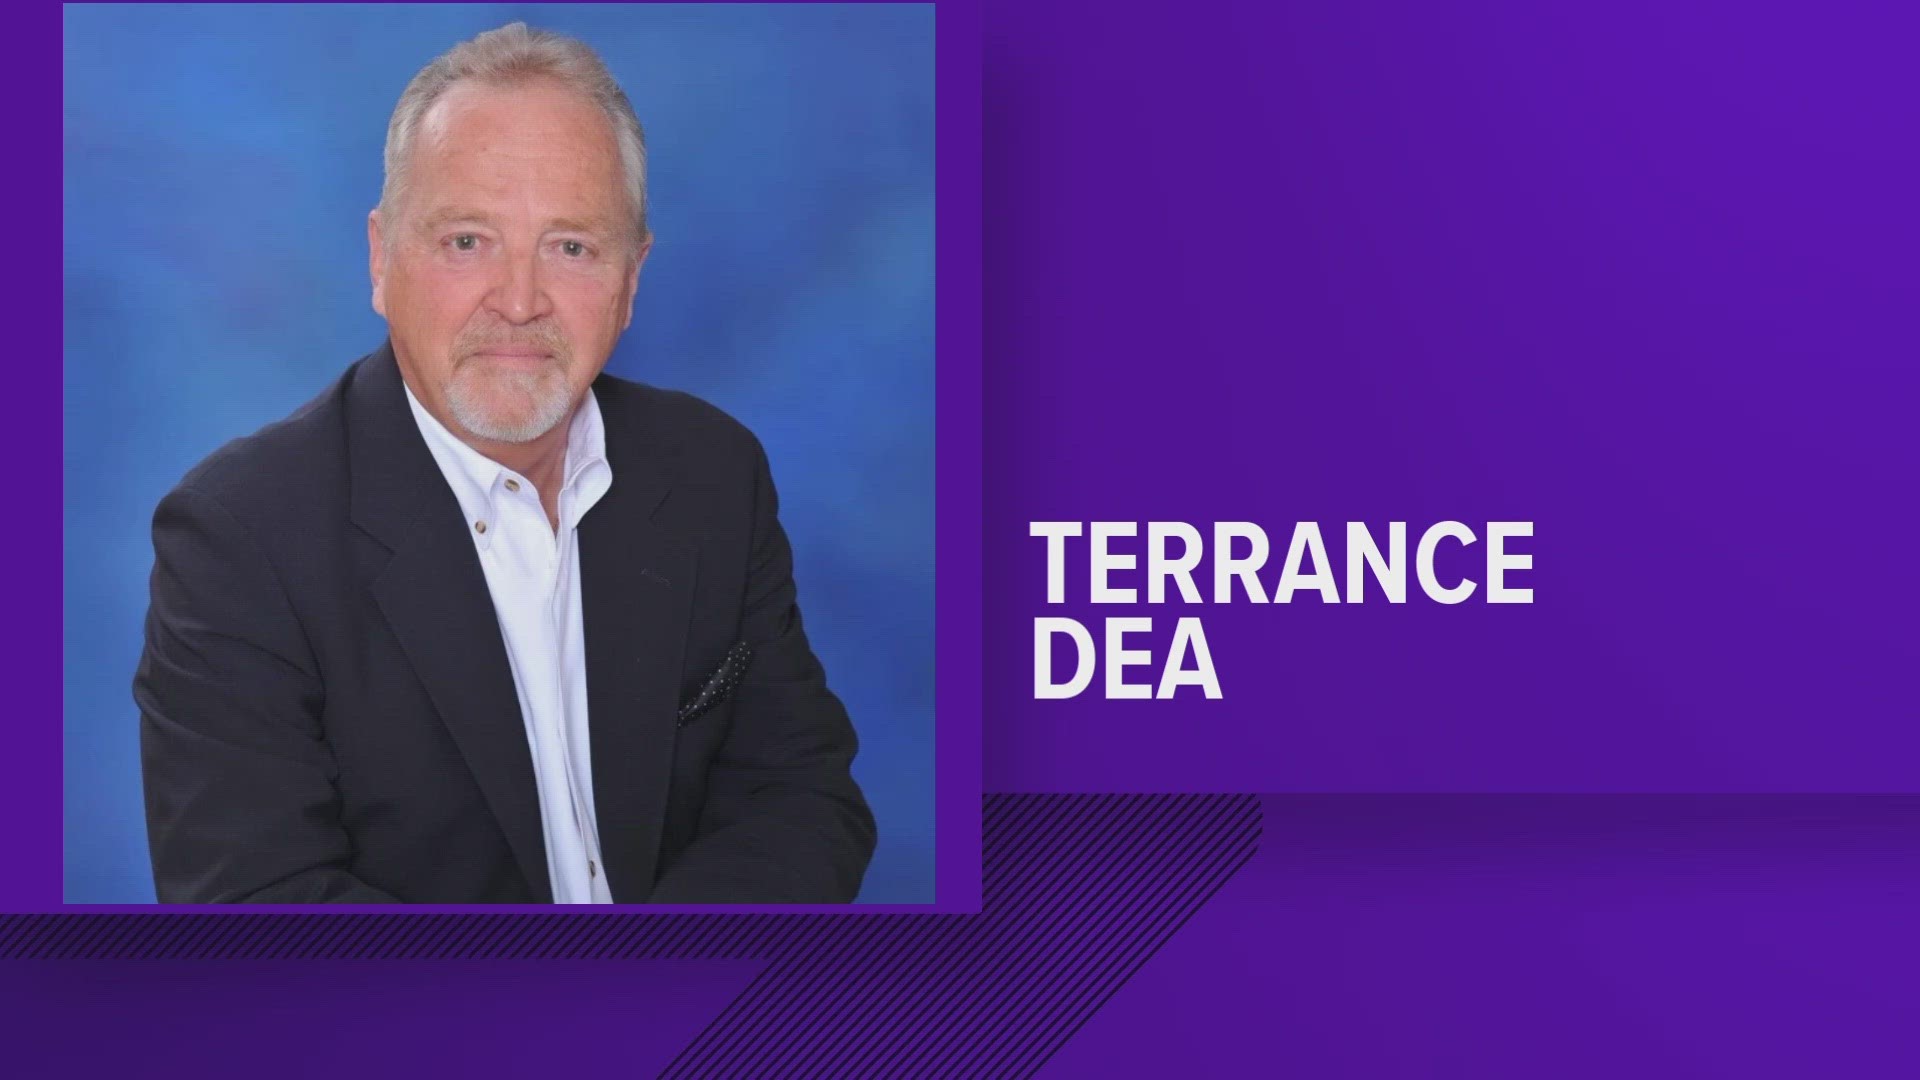 Terrance Dea is a 2023 recipient of the Carnegie medal, which is given to those who risk their lives saving or attempting to save the lives of others.